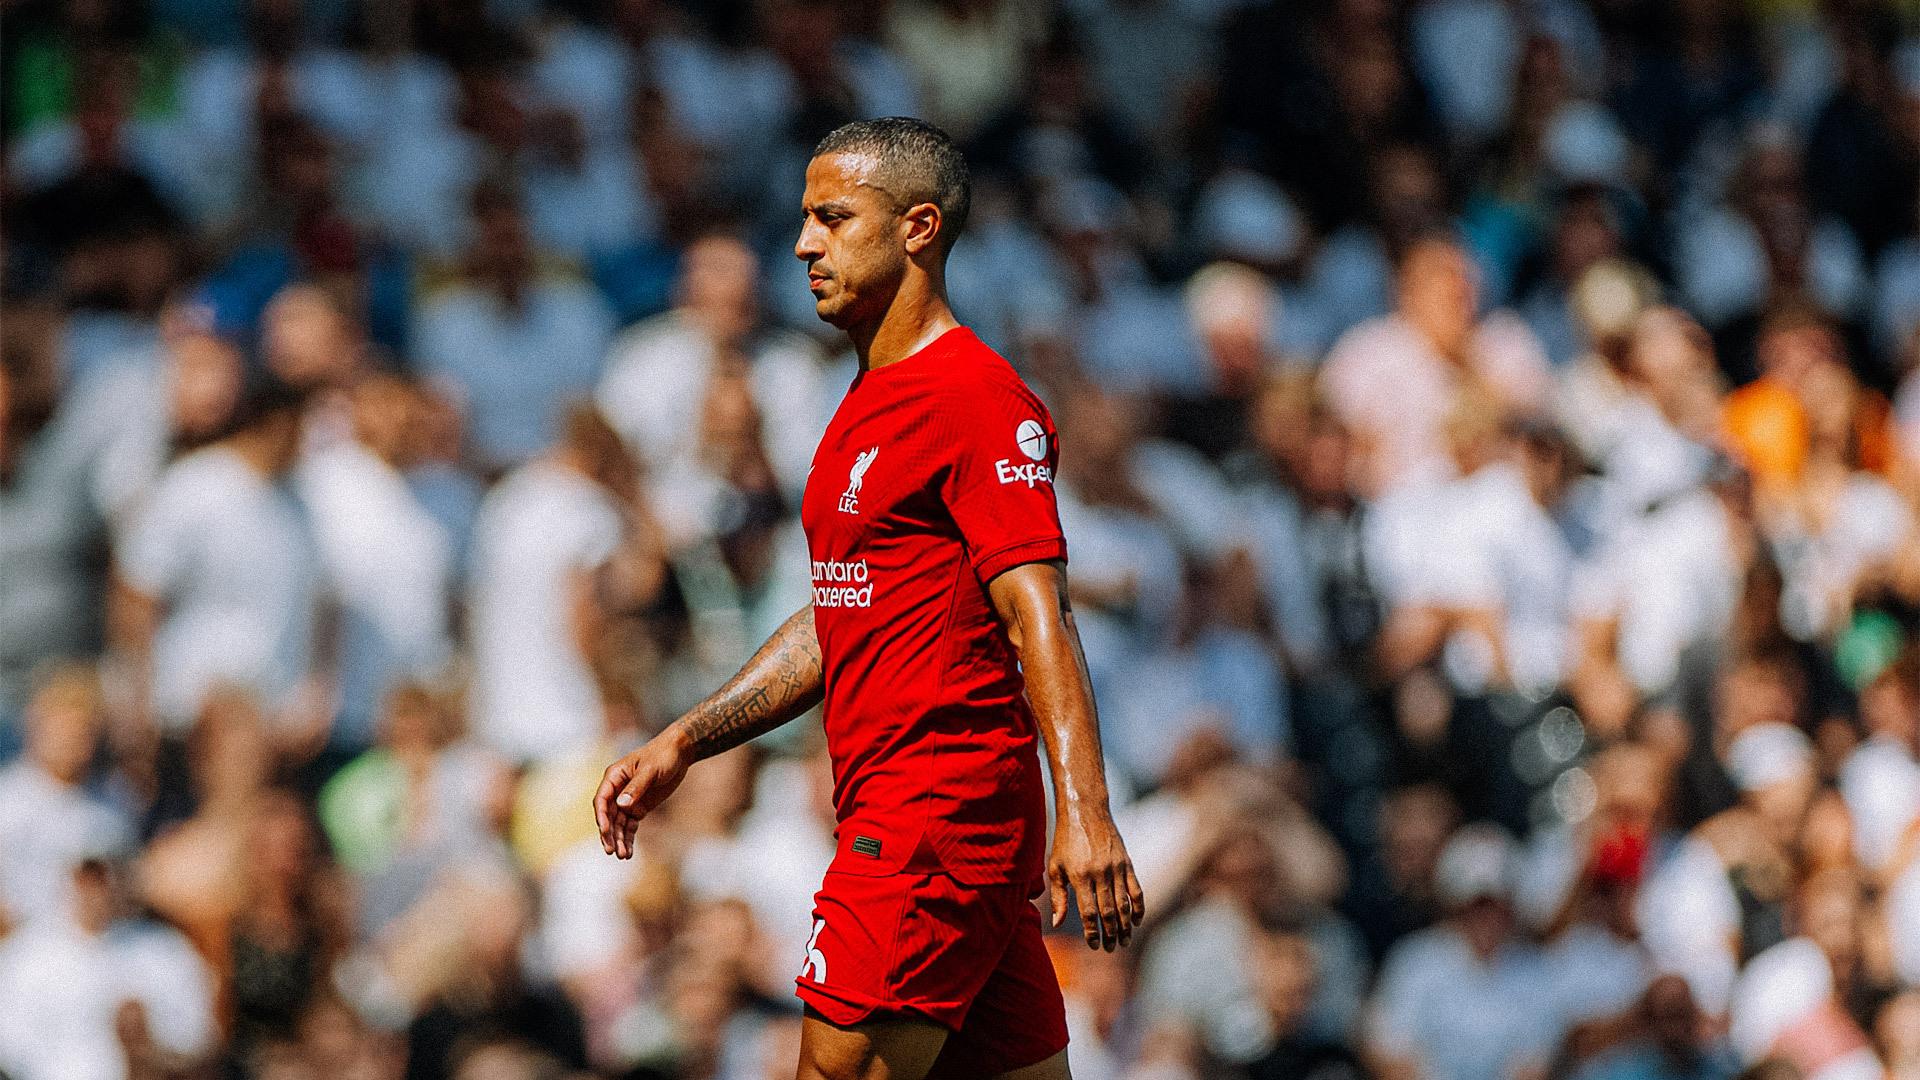 Liverpool midfielder Thiago Alcantara has been brilliant whenever available for the Reds.